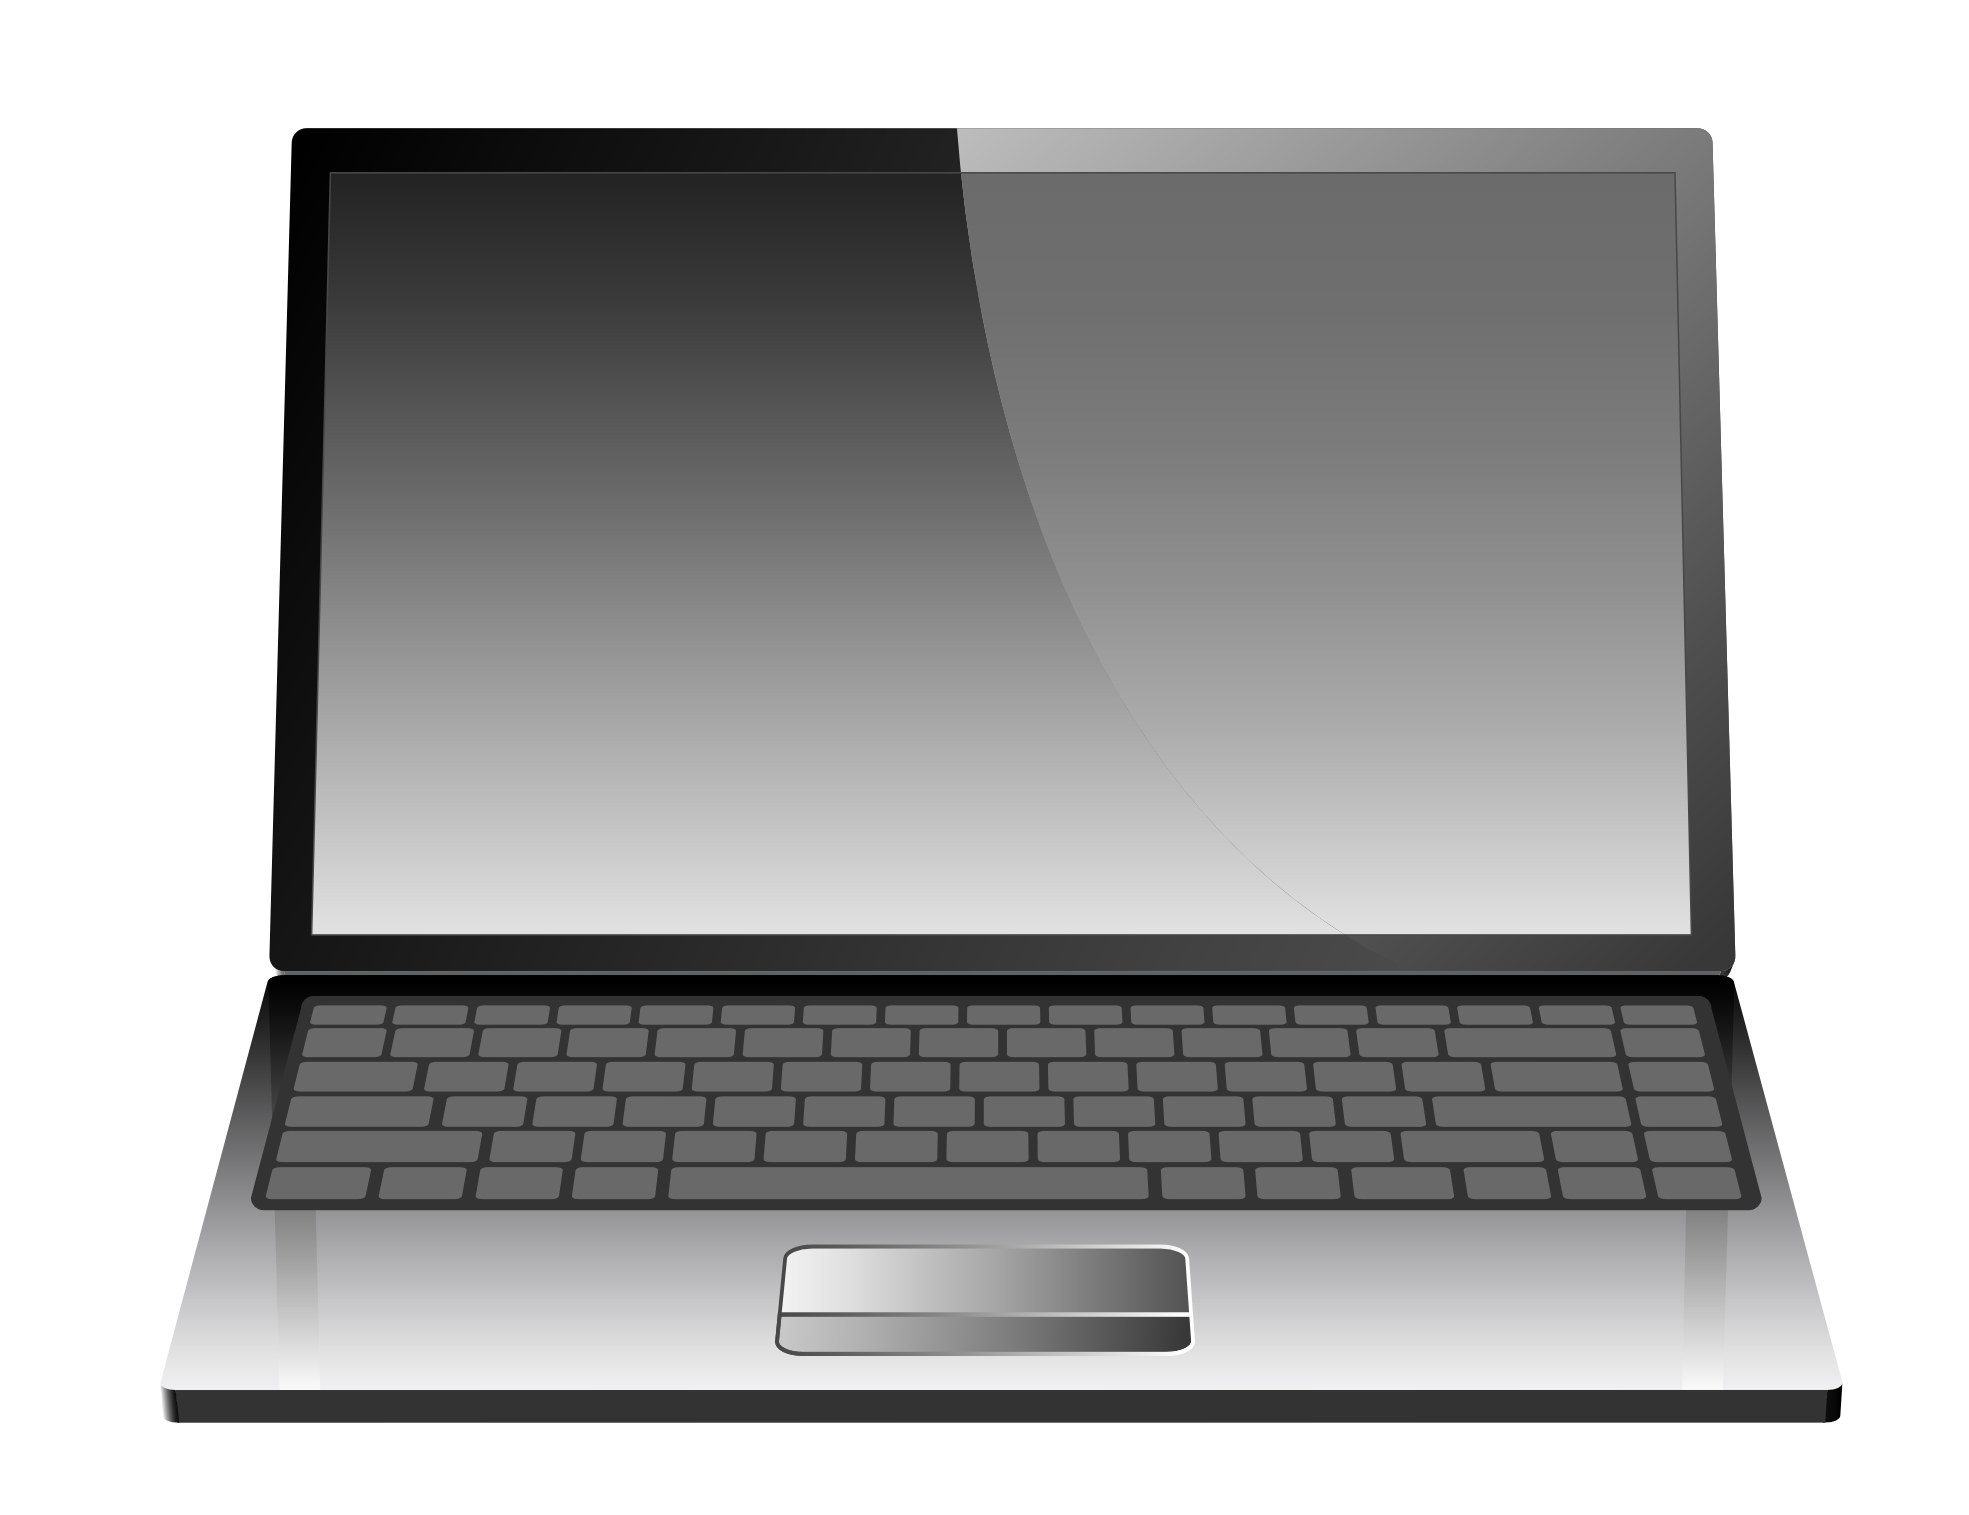 Laptop Notebook Png Image - Notebook, Transparent background PNG HD thumbnail